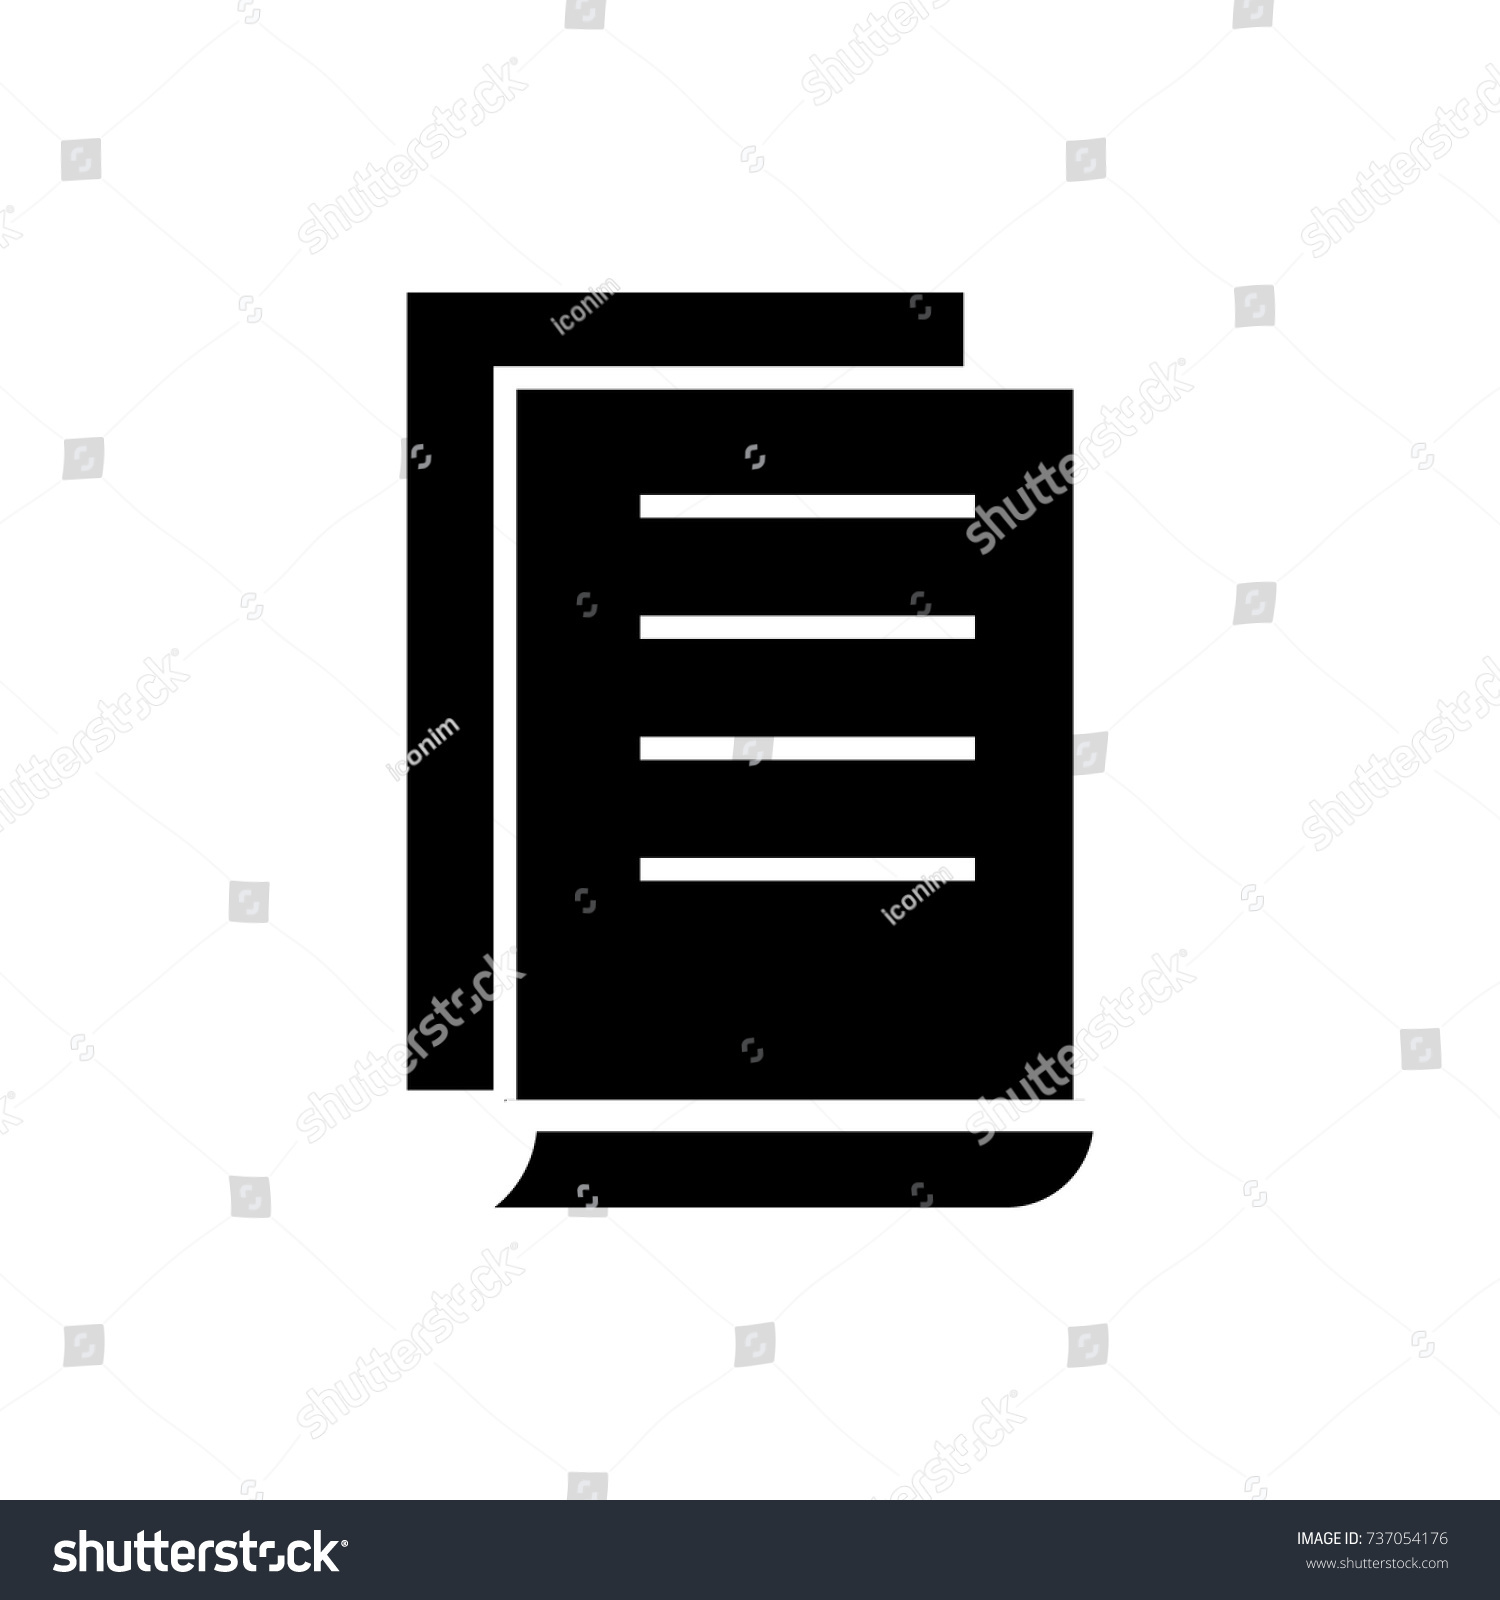 Flat Illustration Blue Smart Contracts Icon Stock Vector 670767724 